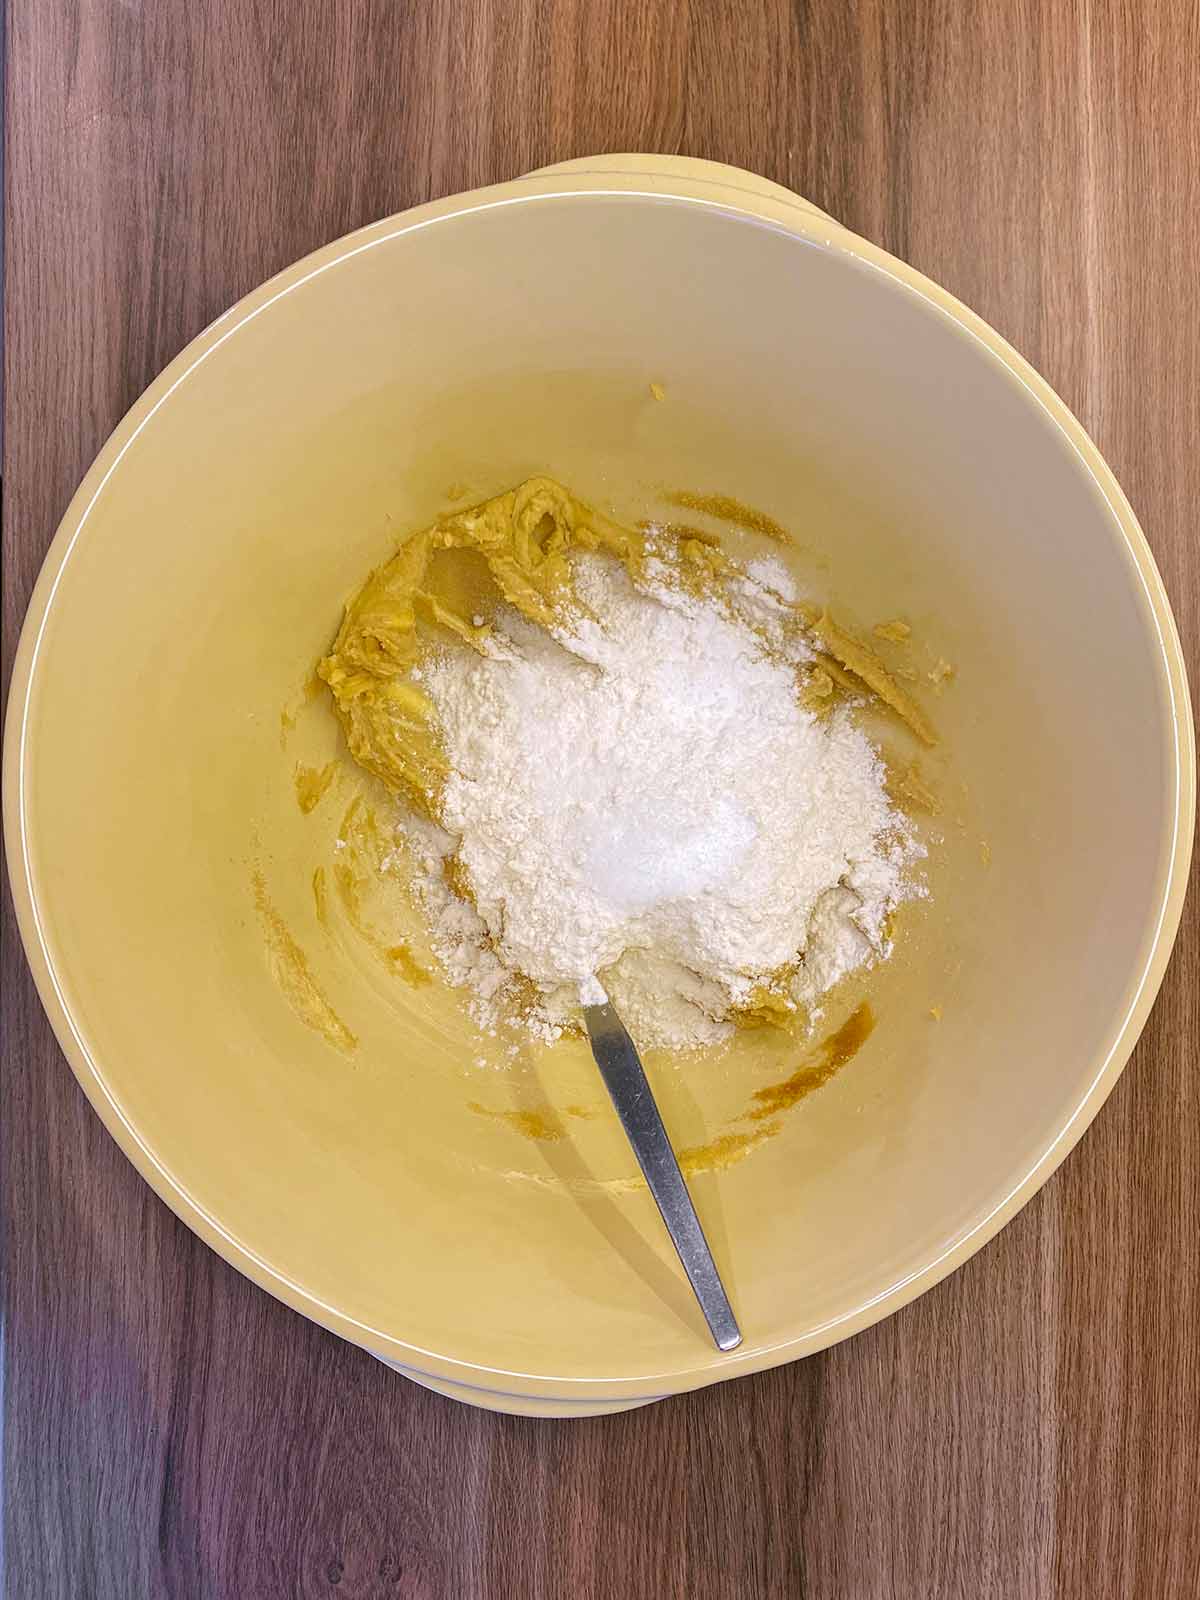 Flour, baking powder and baking soda added to the bowl.